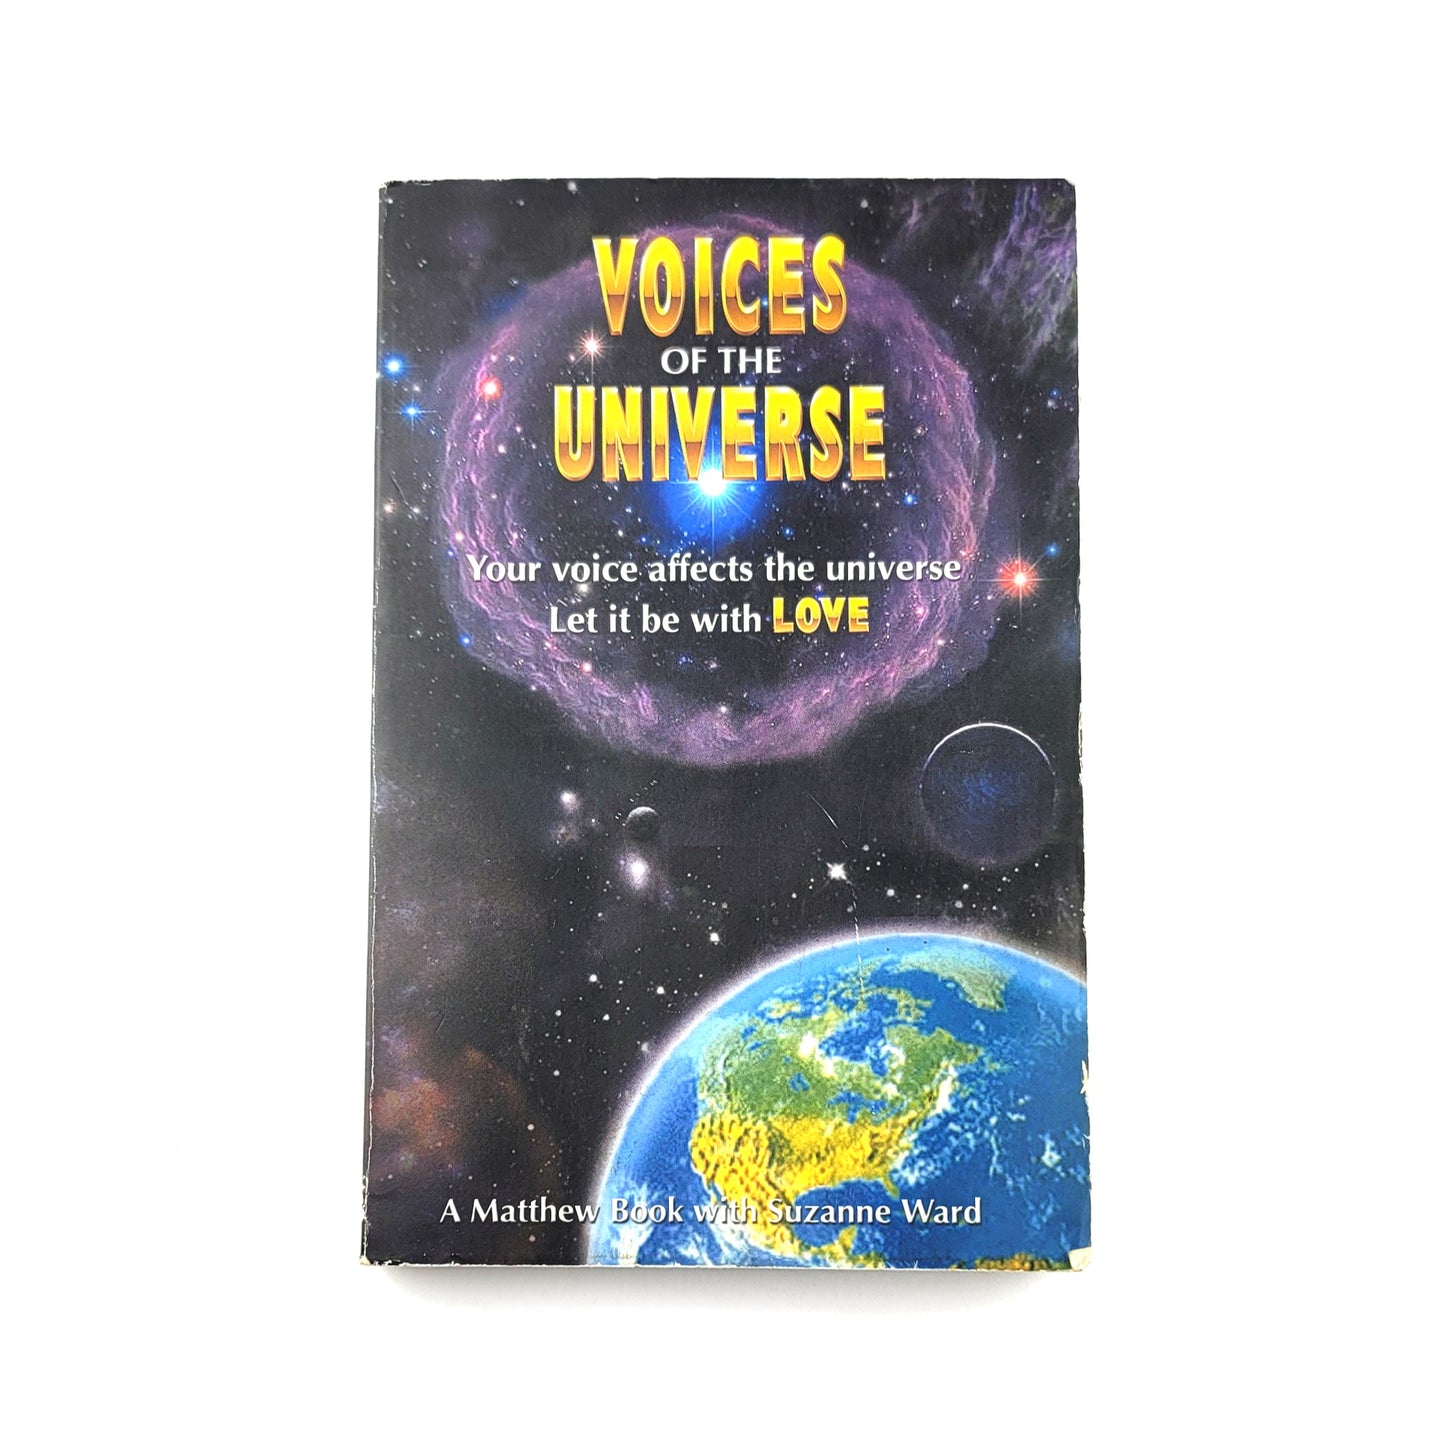 Voices of the Universe: Your Voice Affects the Universe, Let It Be With Love (Matthew Books Book 3) by Suzanne Ward